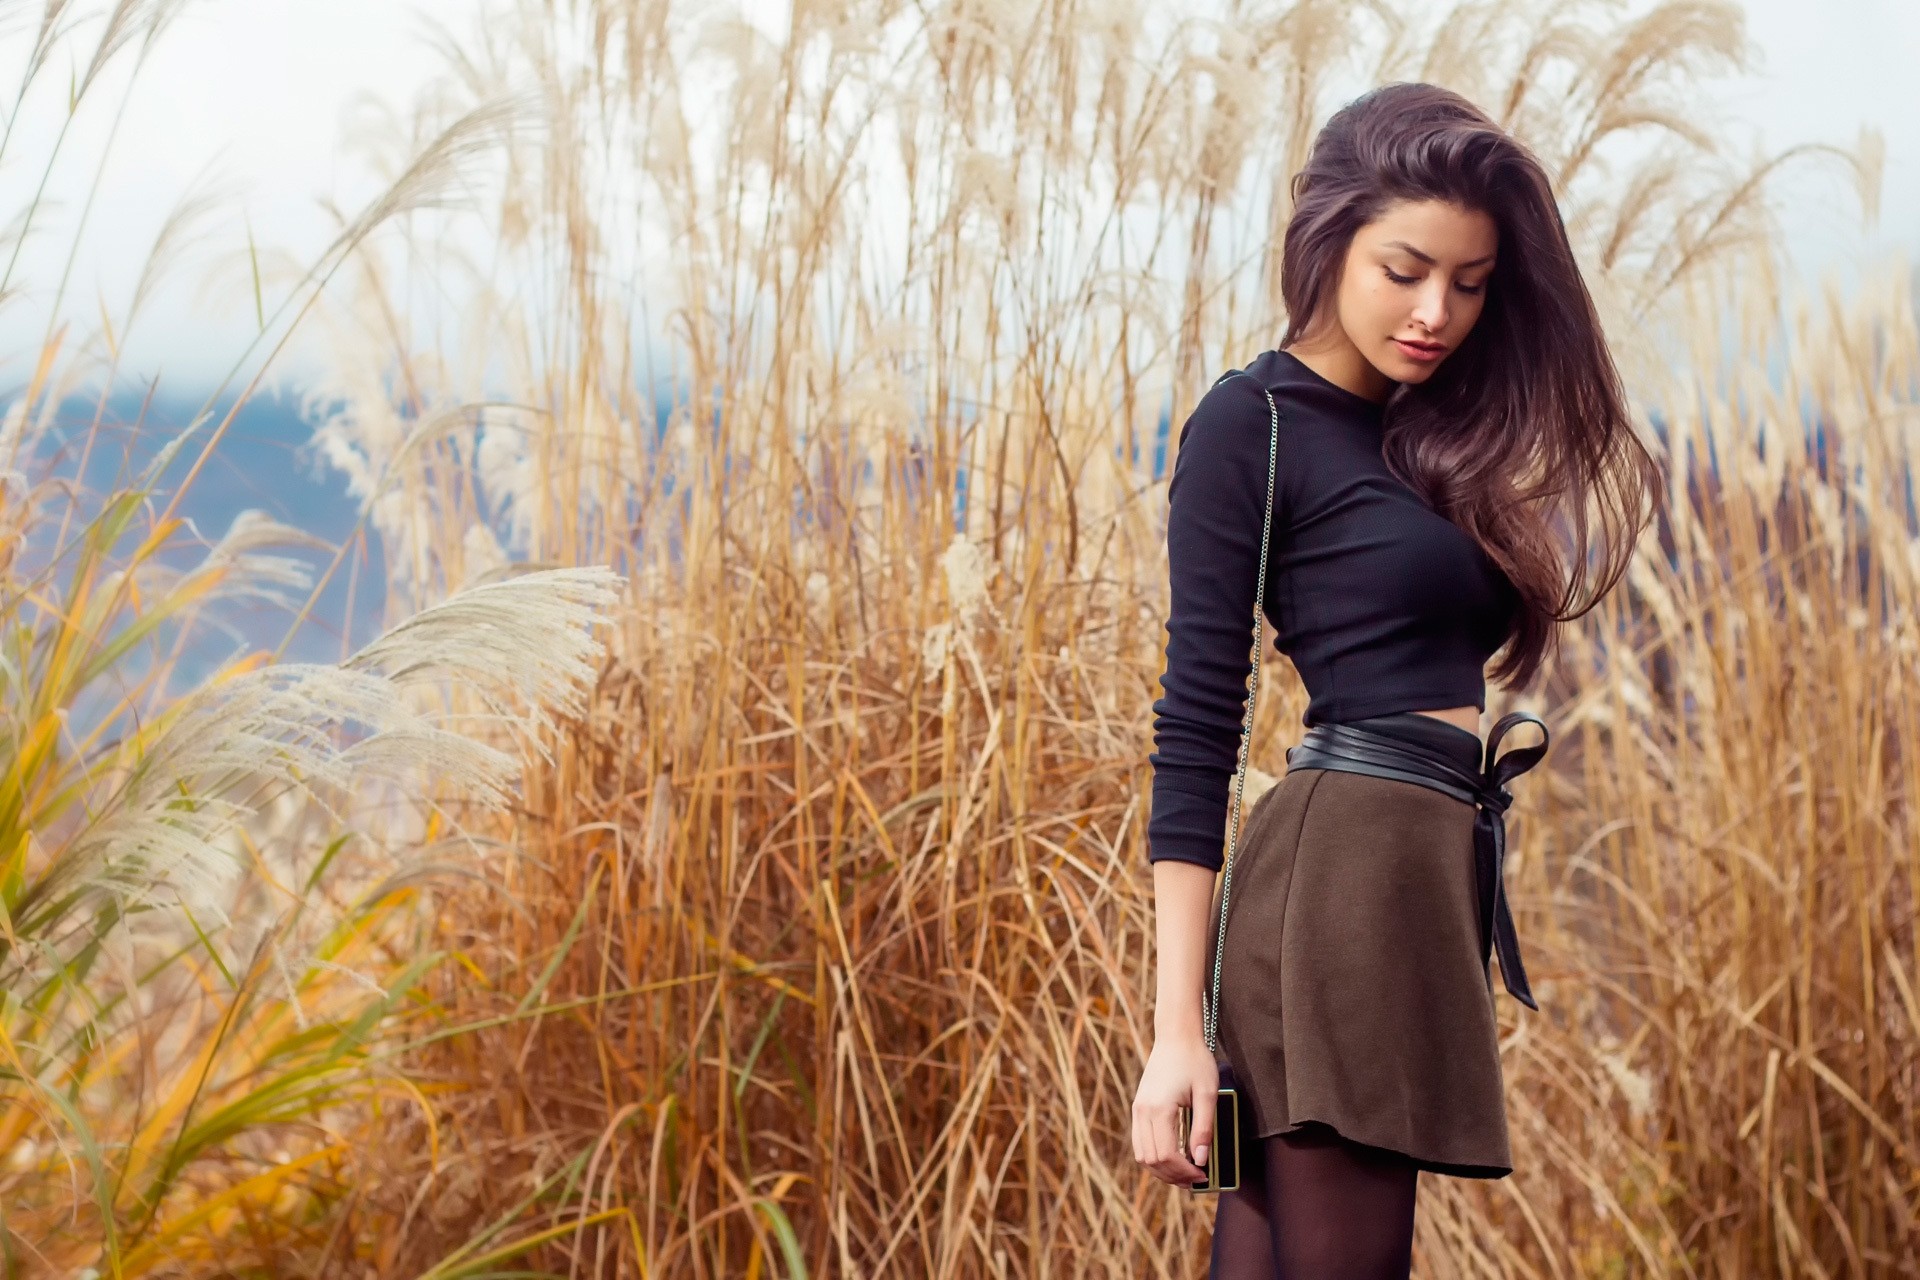 skirt wallpaper,people in nature,beauty,fashion,brown,photo shoot